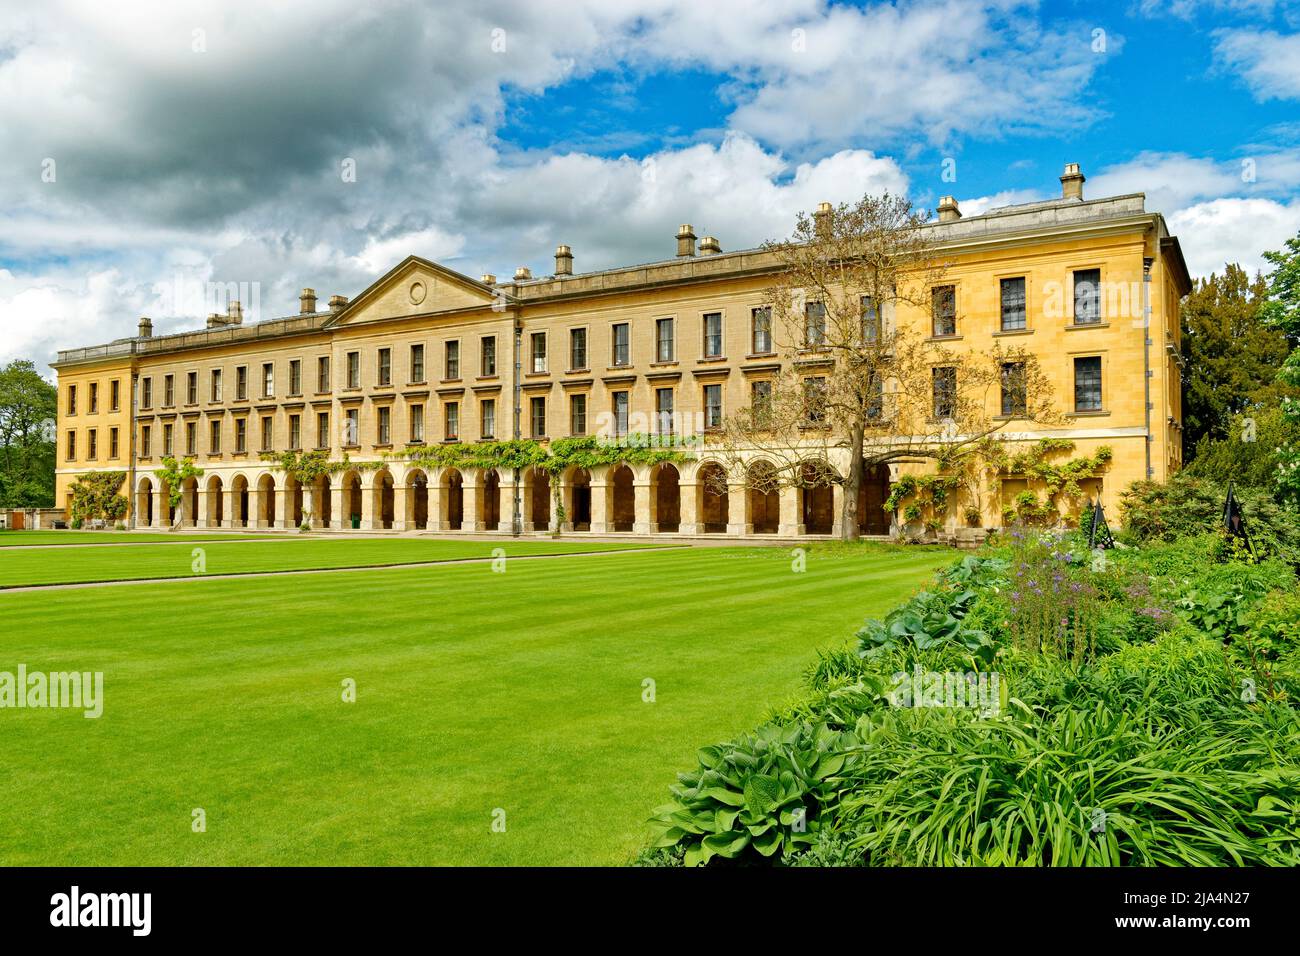 OXFORD CITY ENGLAND MAGDALEN COLLEGE THE NEW BUILDING EMPRESS TREE  FLOWER BEDS AND LAWNS IN SPRINGTIME Stock Photo